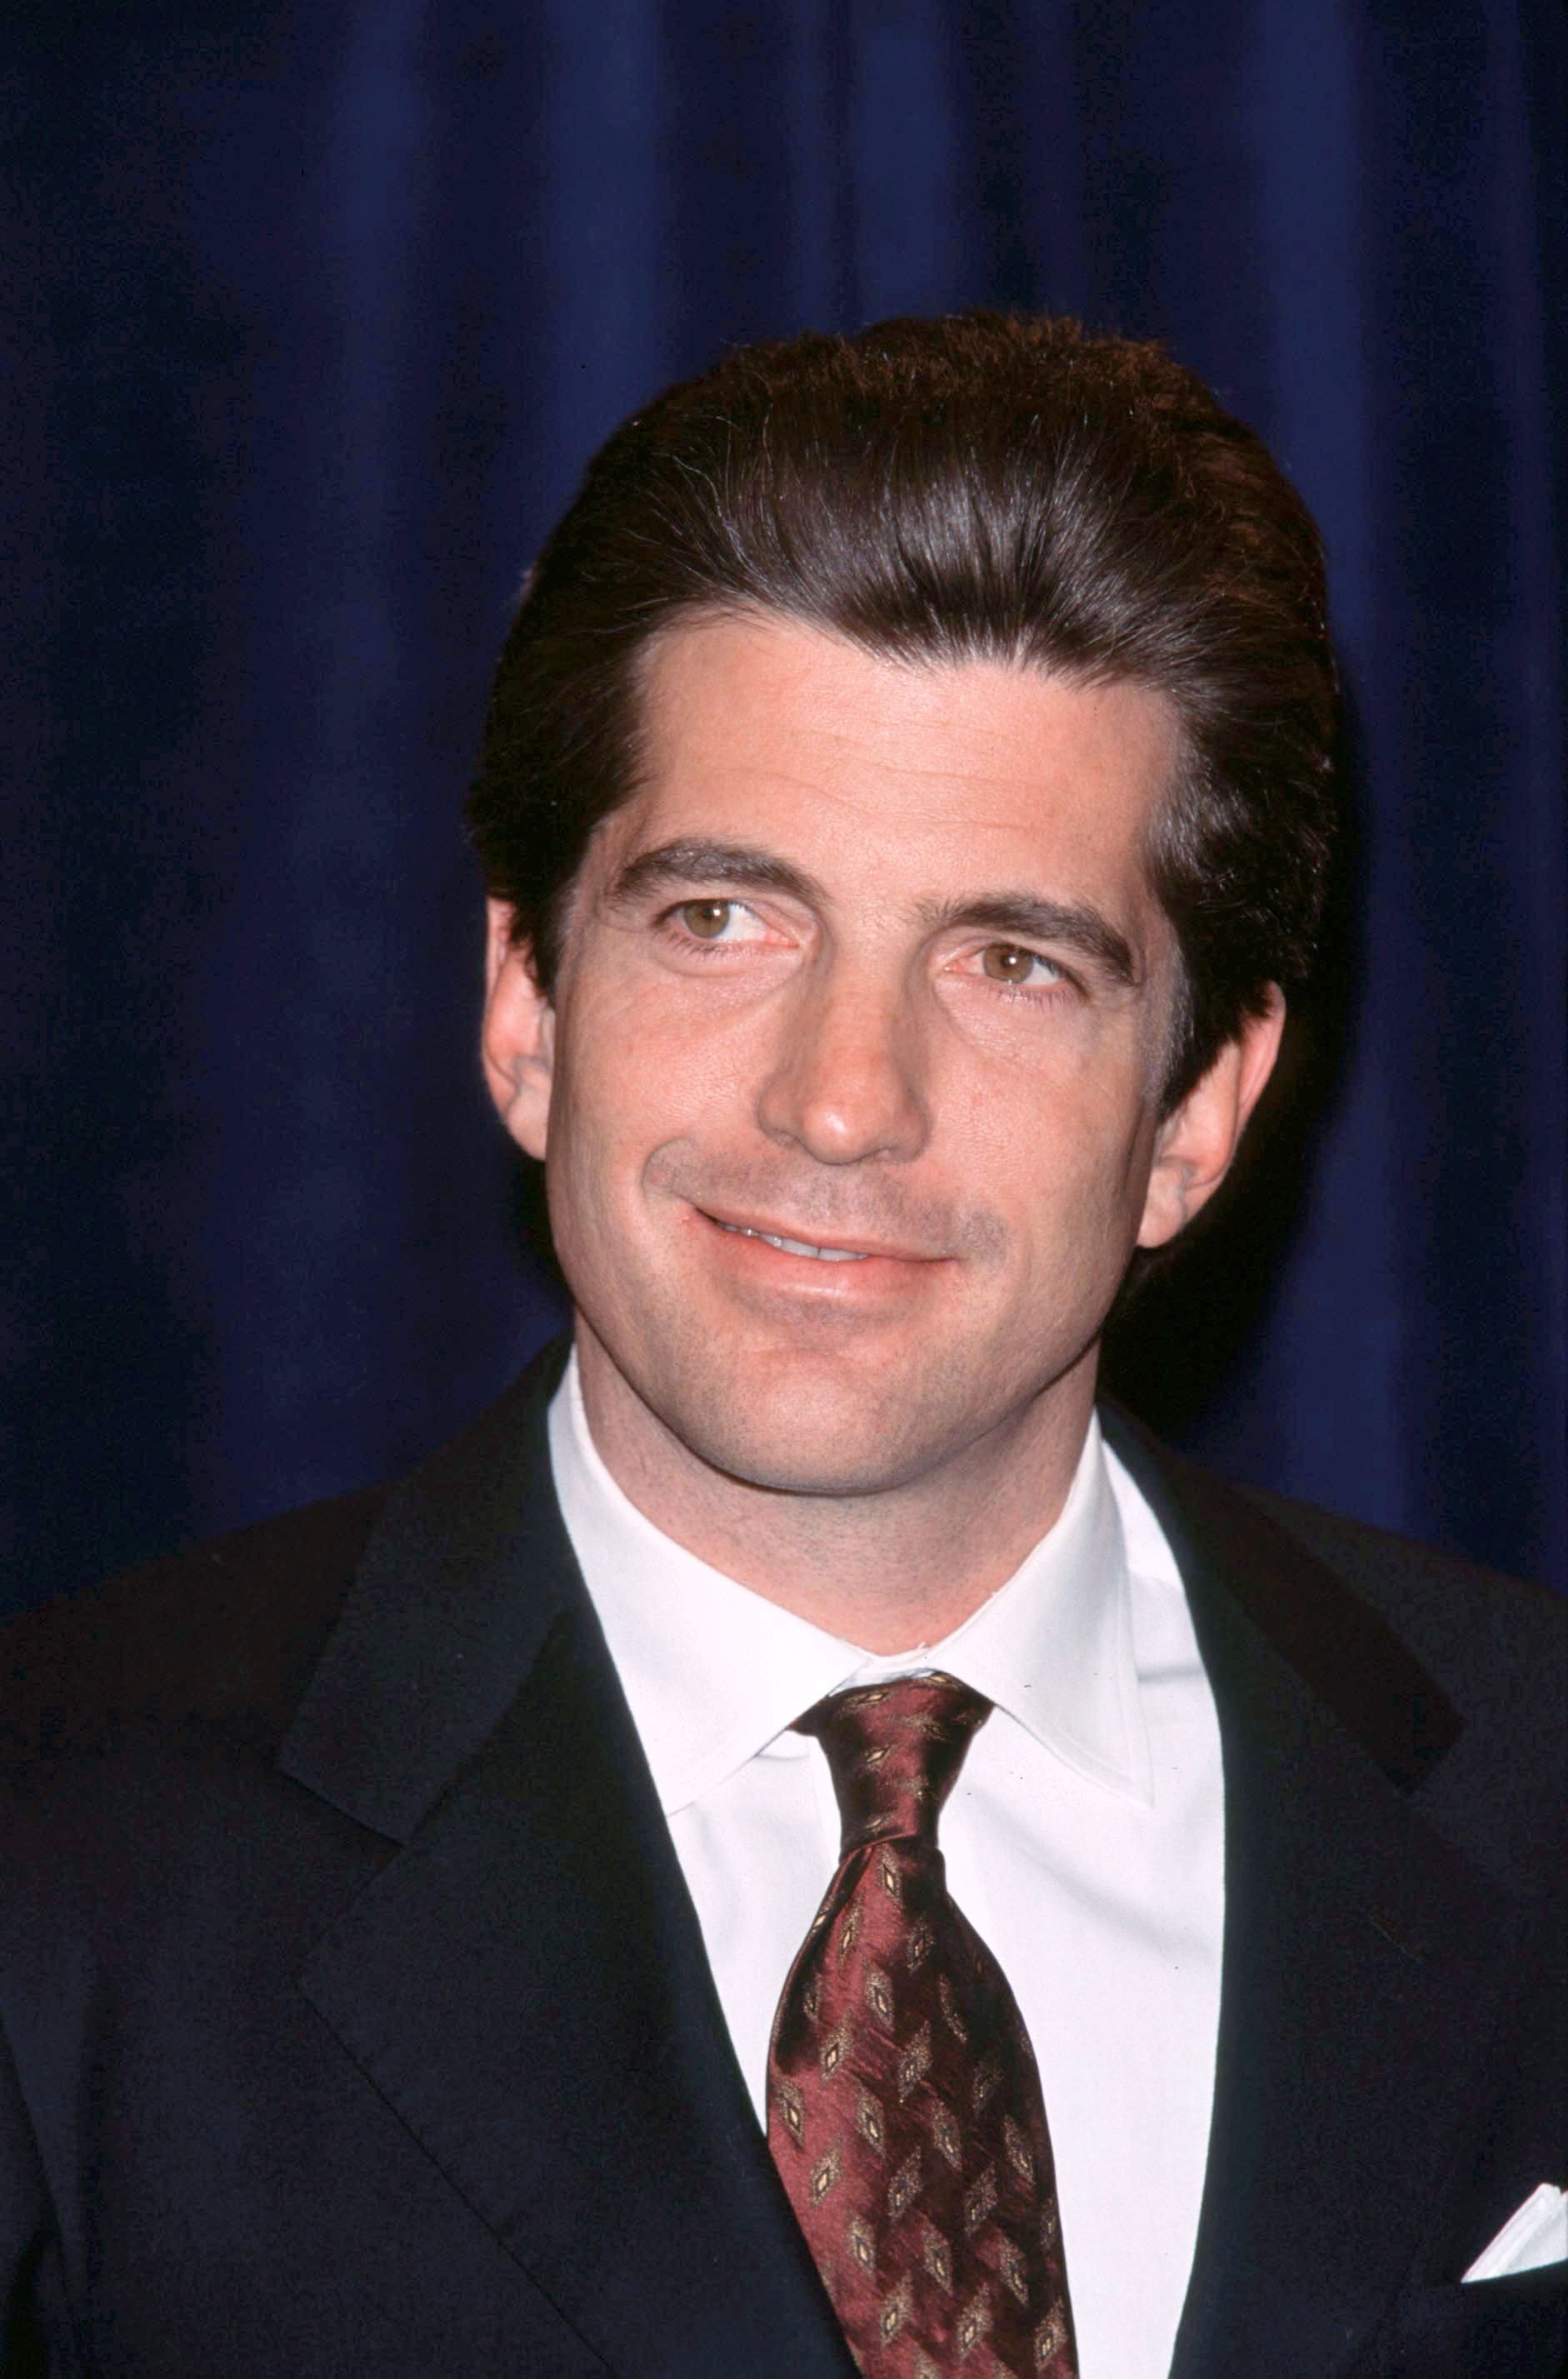 John Kennedy Jr. announces endowed Jackie Robinson scholarship, at the Jackie Robinson foundation dinner on October 05, 1998 Photo: Getty Images